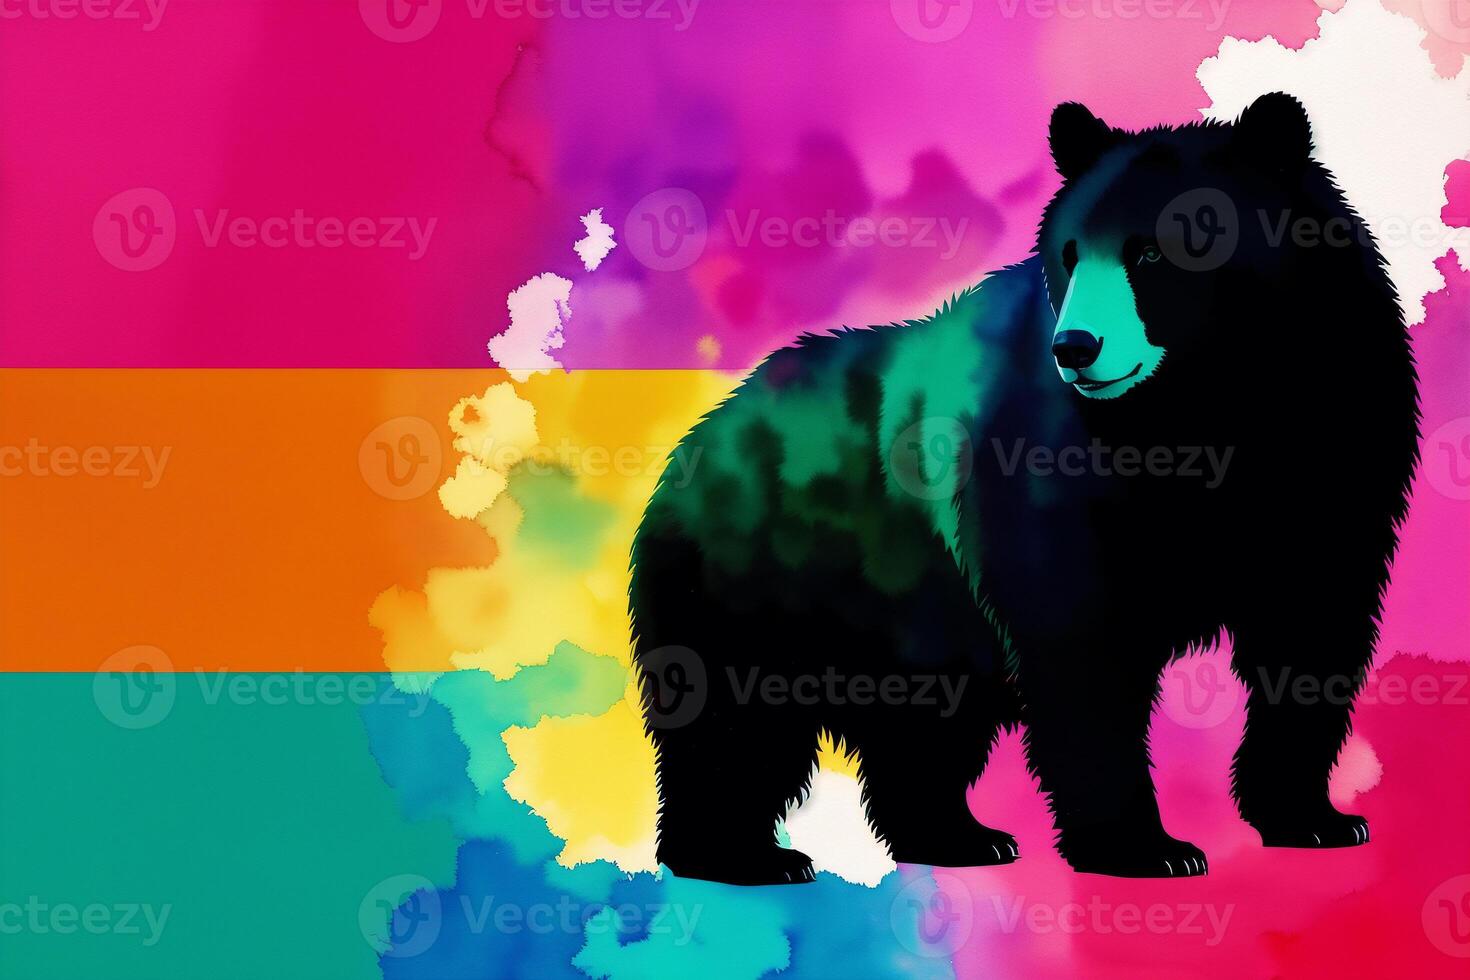 Illustration of a bear on abstract watercolor background. Watercolor paint. Digital art, photo